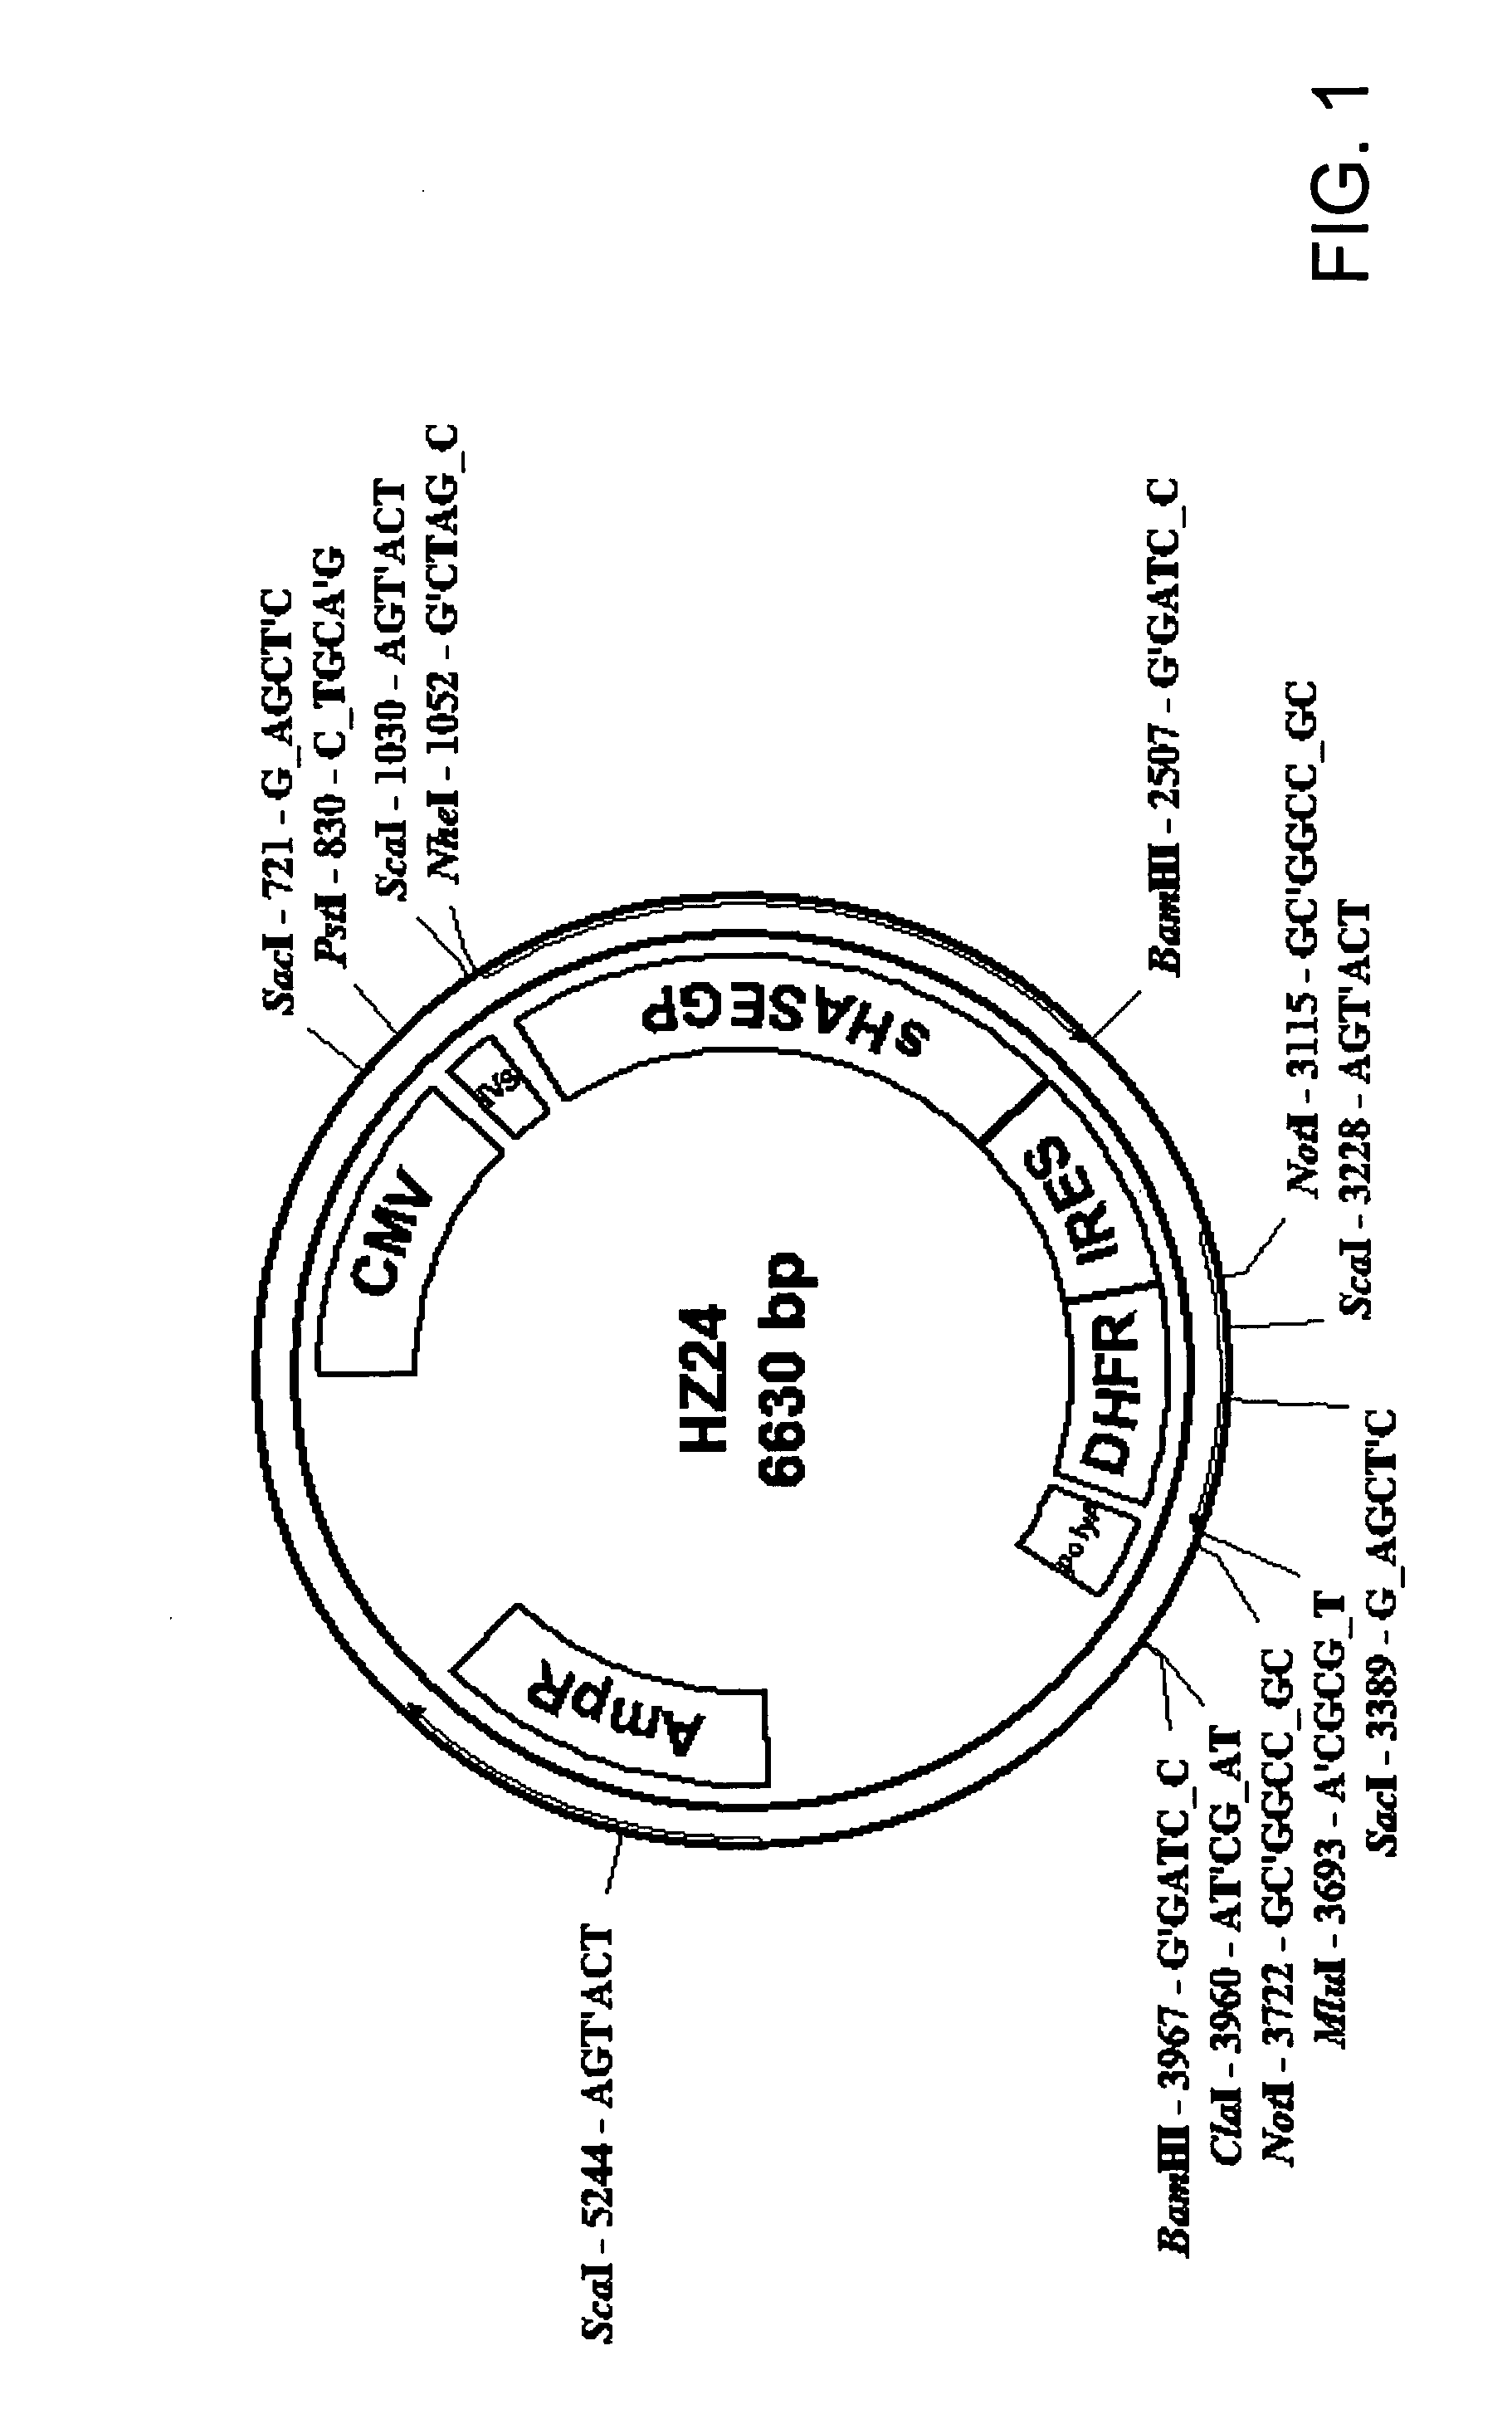 Soluble hyaluronidase glycoprotein (sHASEGP), process for preparing the same, uses and pharmaceutical compositions comprising thereof